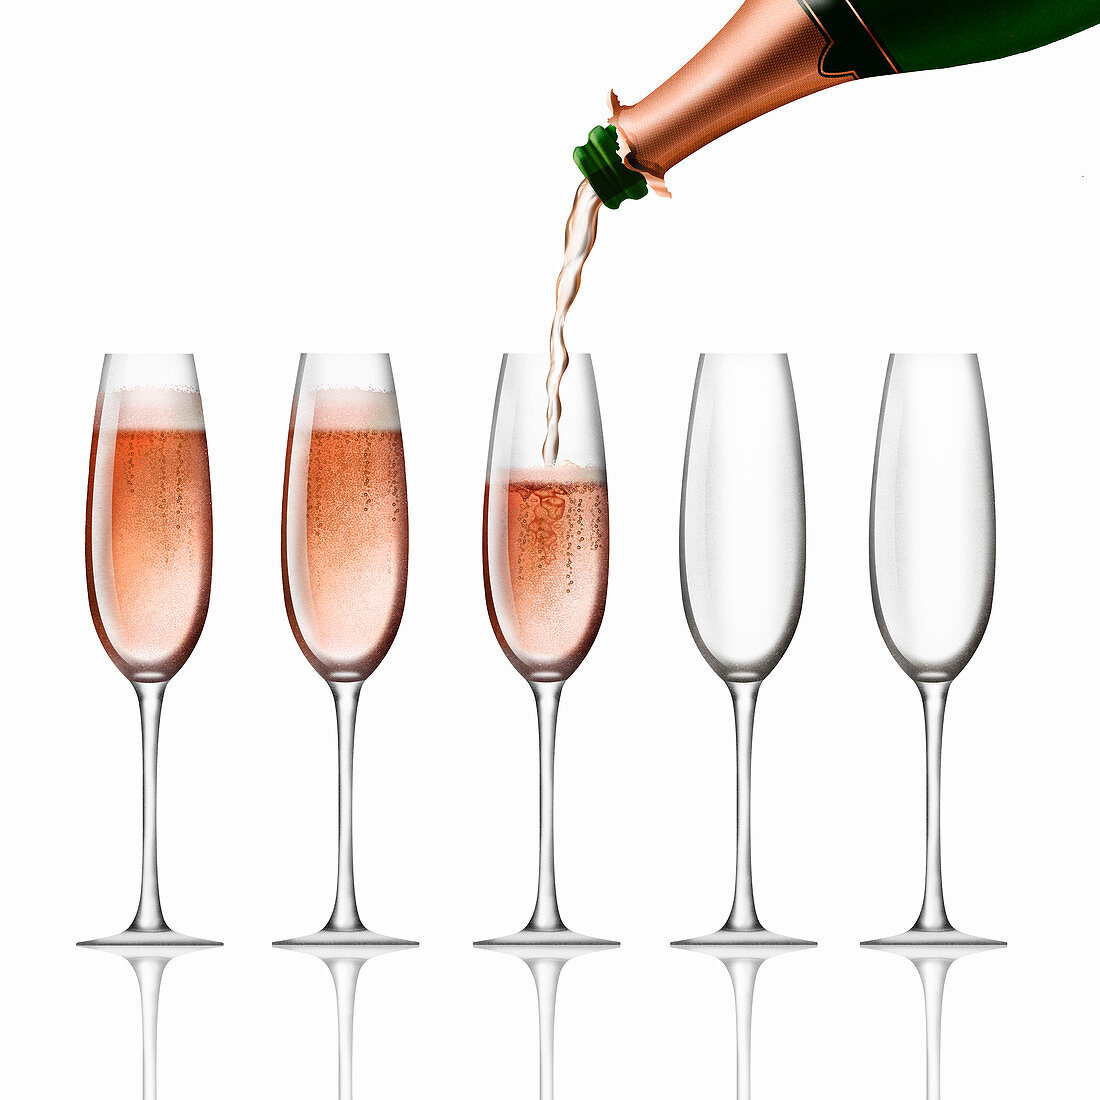 Bottle of pink champagne pouring into flutes, illustration